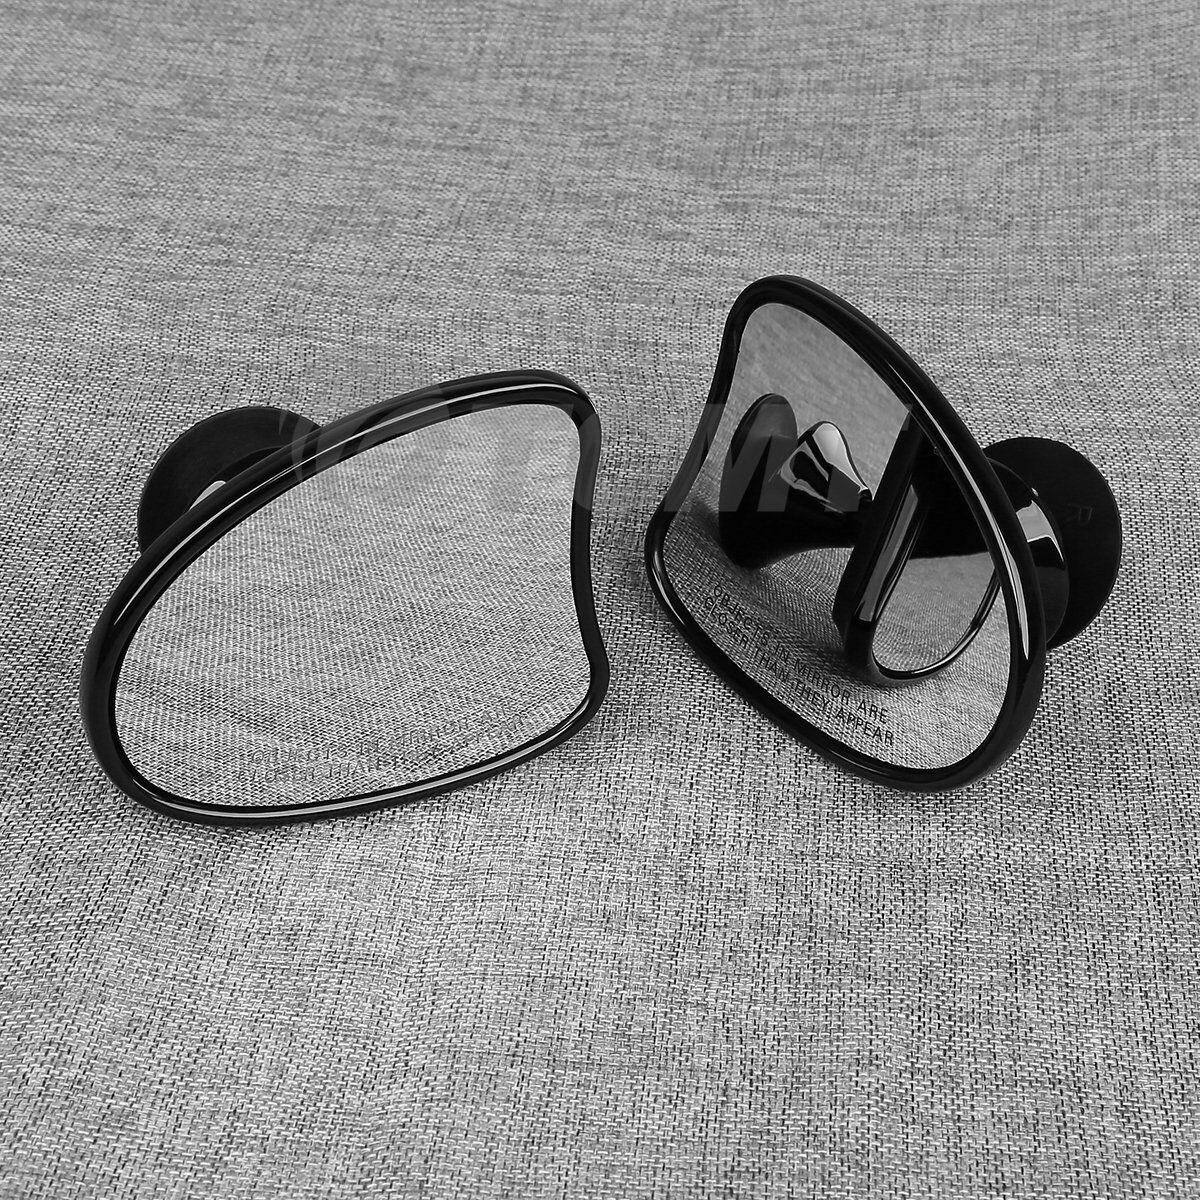 New Black Tapered Fairing Mount Mirrors For Harley Touring FLHT FLHX 2014-2022 - Moto Life Products